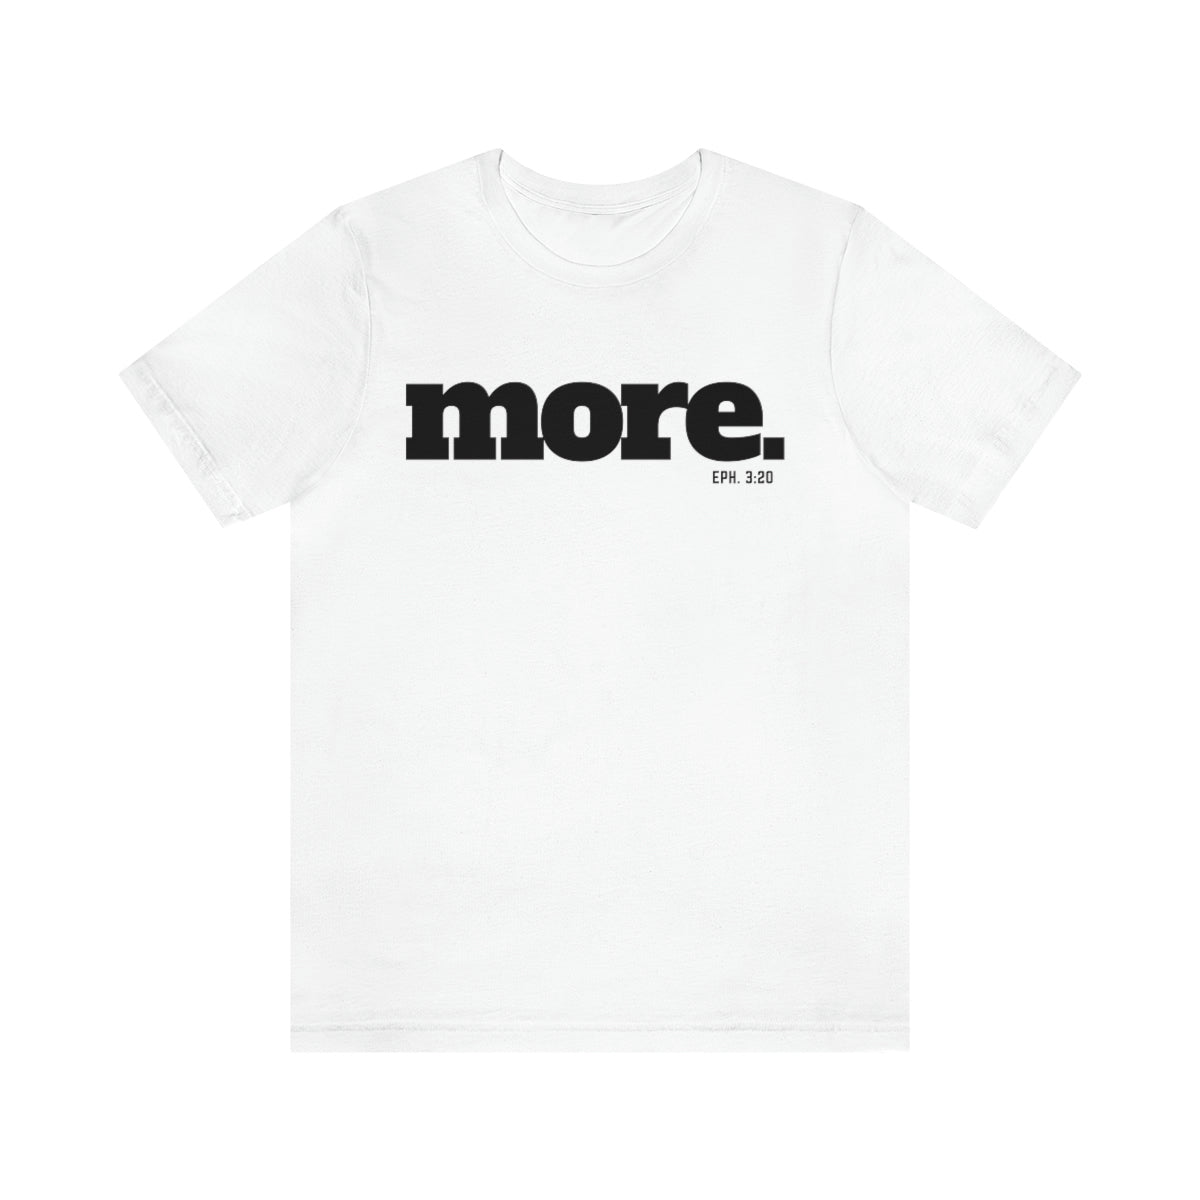 MORE T-Shirt - White Unisex - Beyond The Walls Int'l